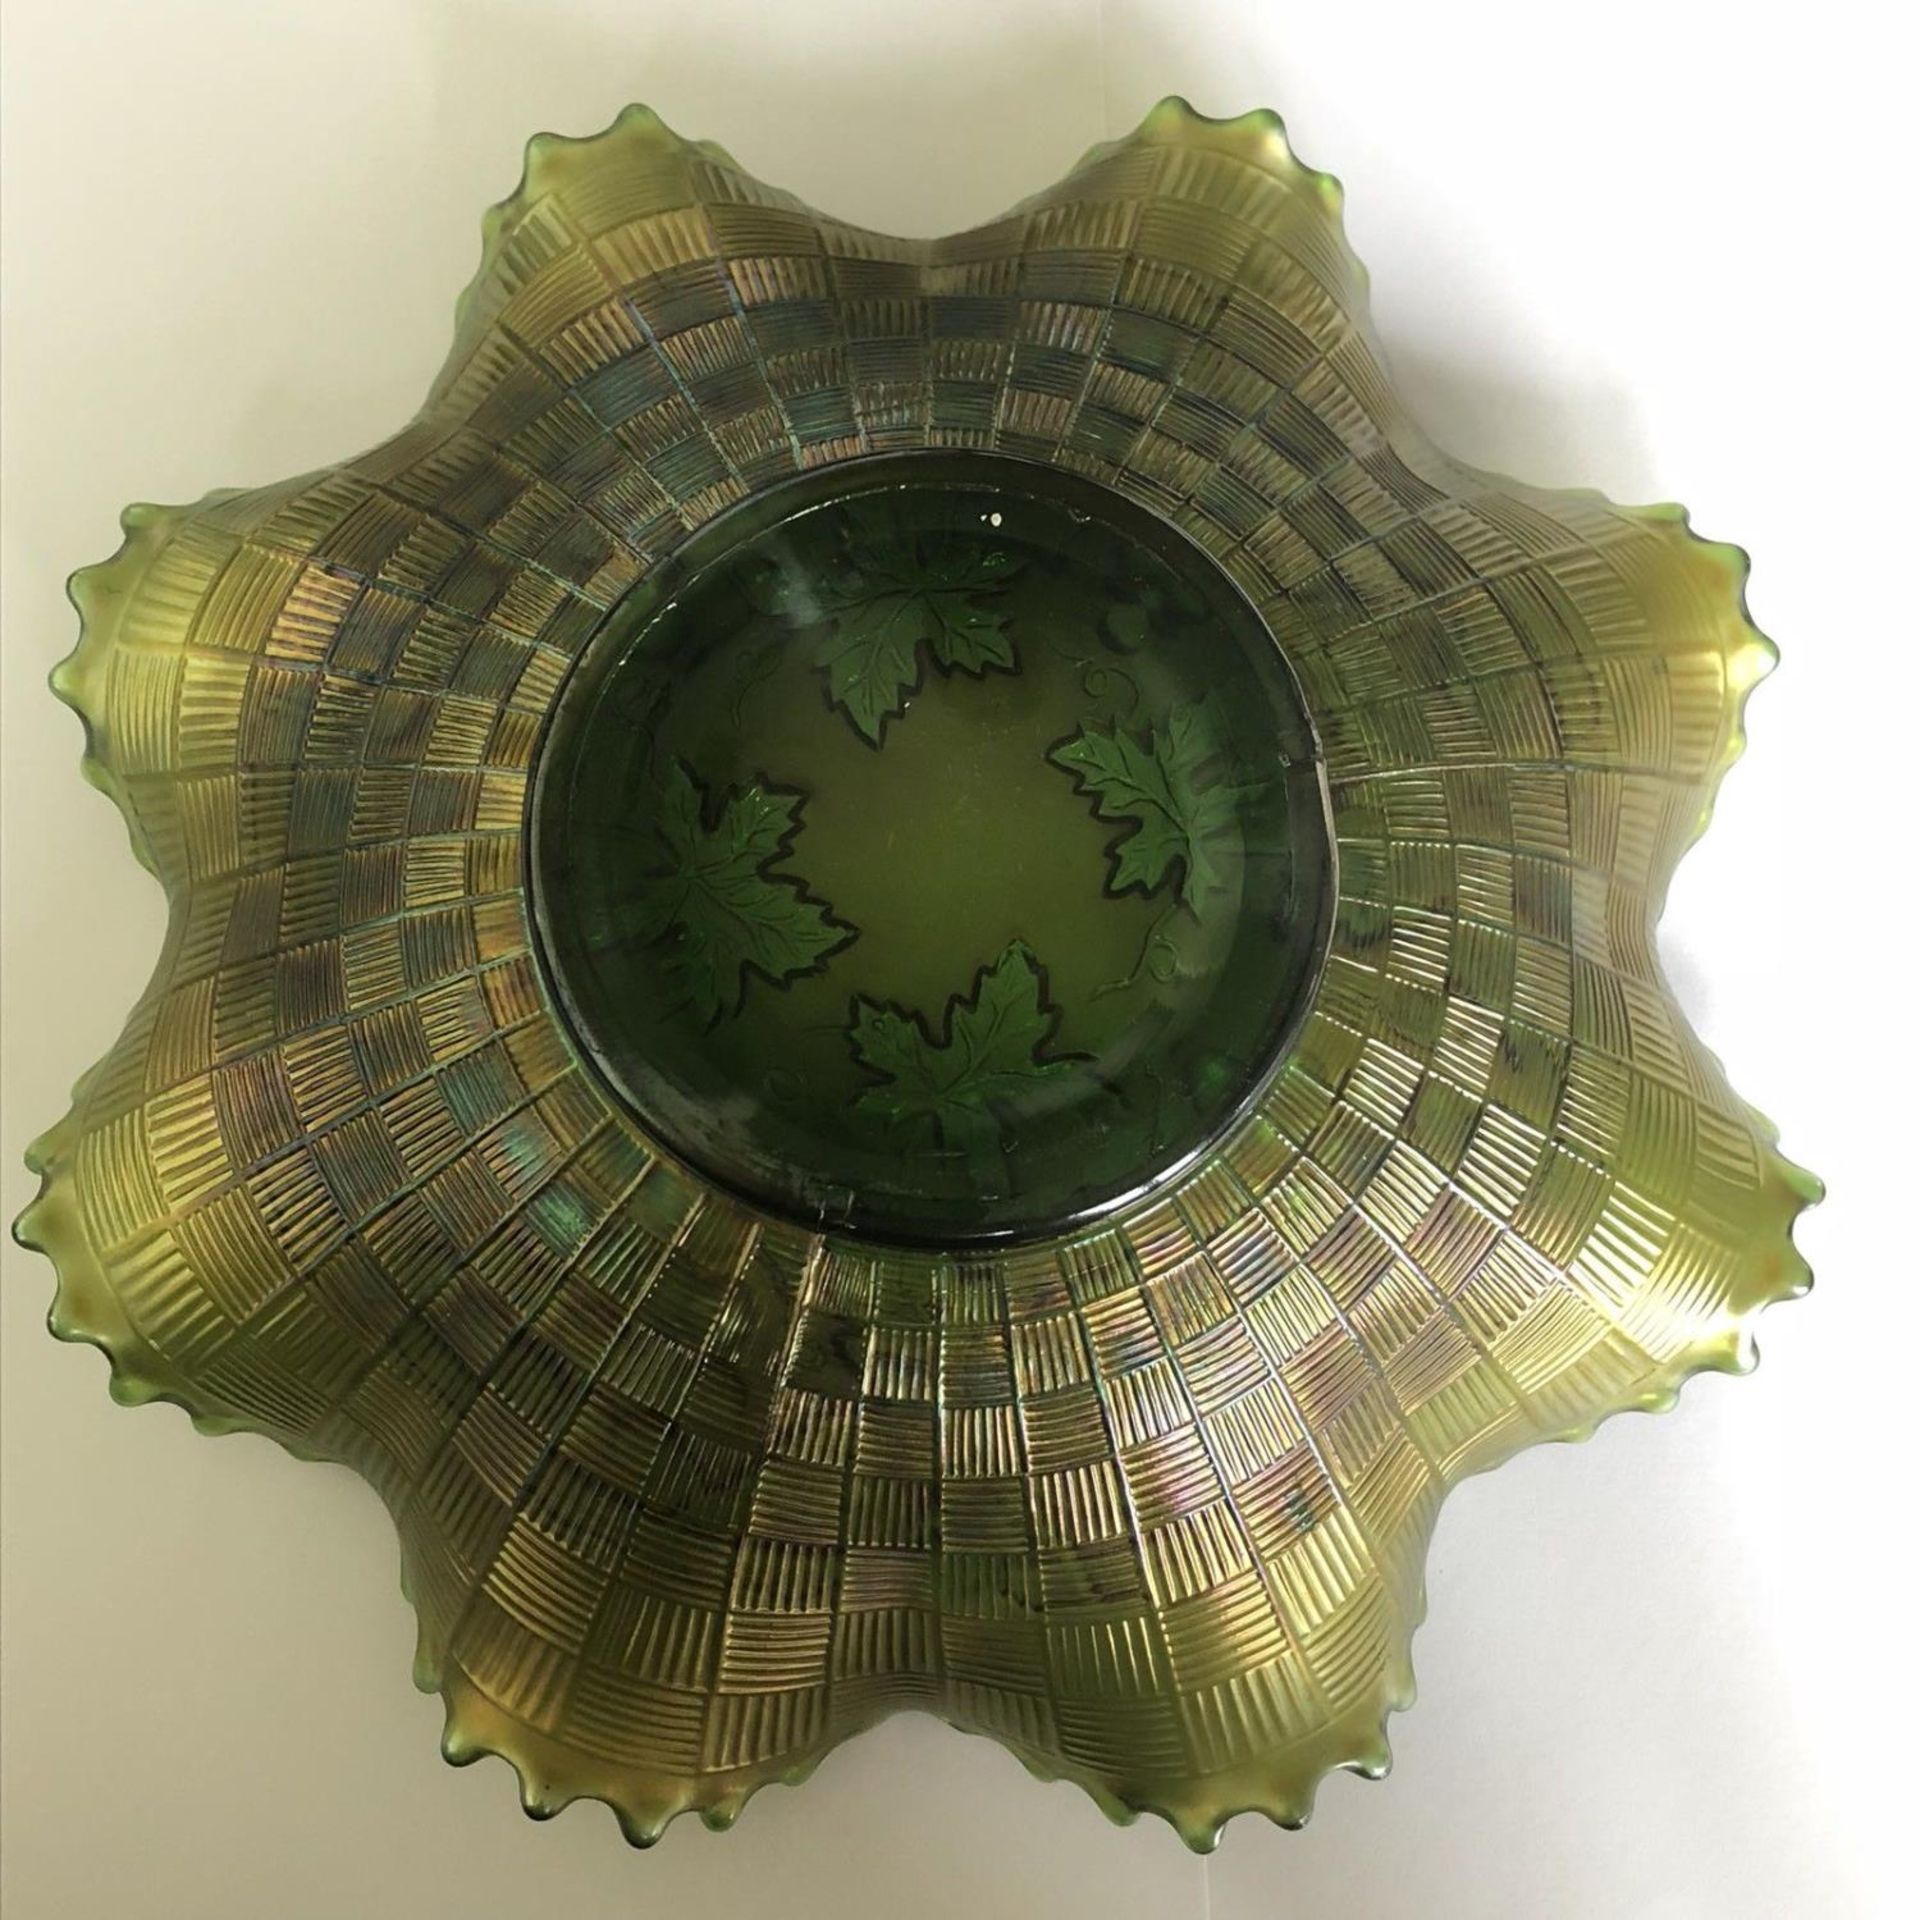 Ruffle Edge Carnival Bowl Amethyst irridescence on Green Glass - Grapes and Vine Leaves Pattern - Image 3 of 3